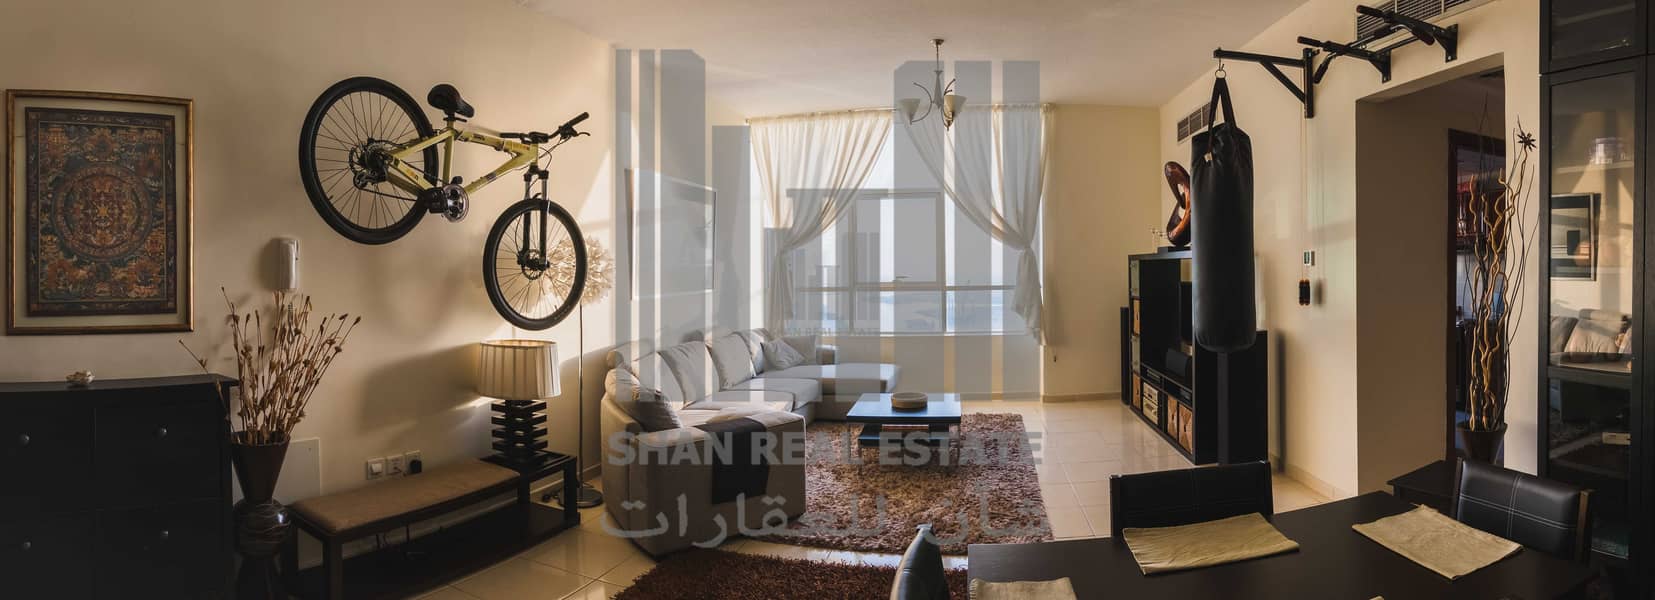 Big Balcony | 1 bedroom | Monthly  |  Fully Furnished